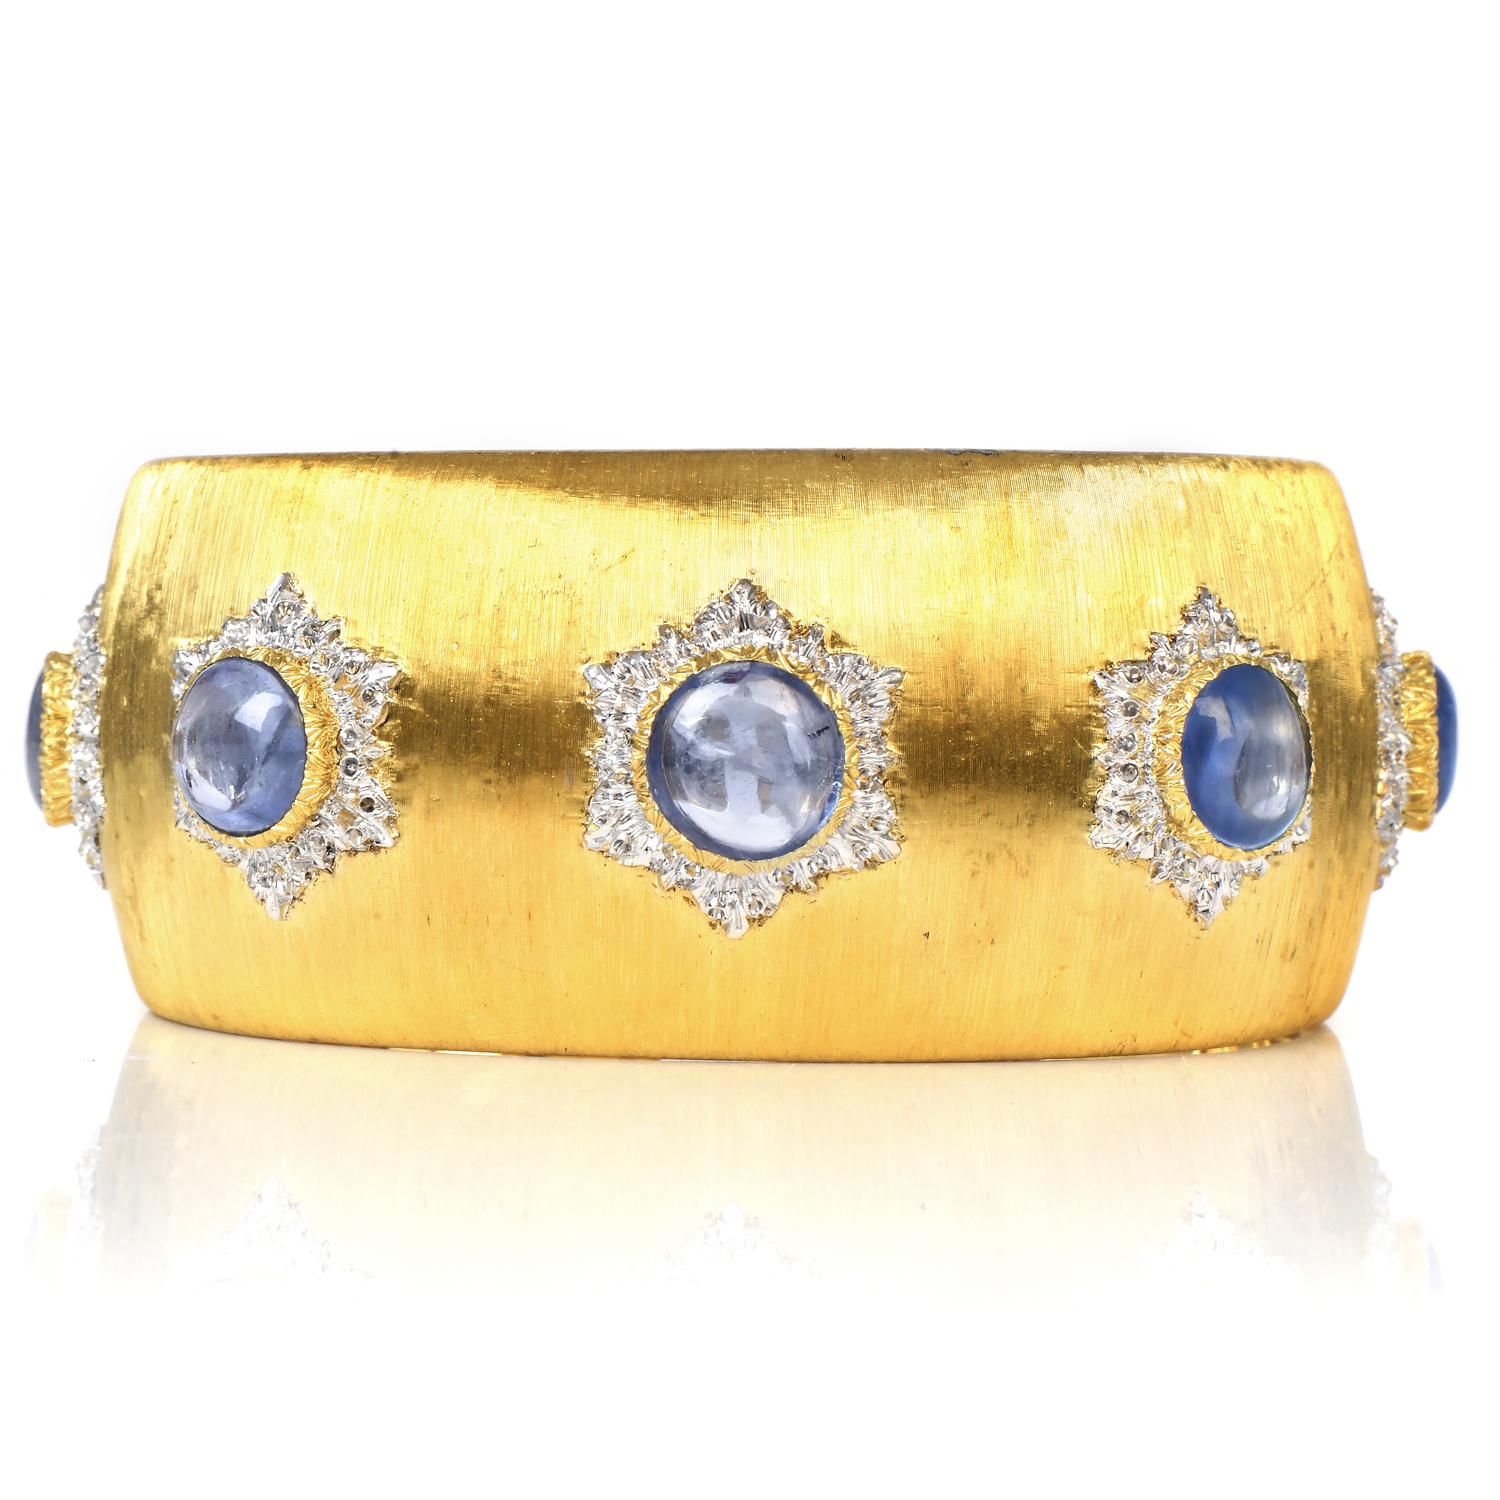 This extraordinary well detailed Vintage Buccellati Sapphire Cuff Bracelet.

Inspired by the power of the flowers, it is 60.4 Grams of Luxurious 18K Yellow & White Gold.

The Rigato satin finish is a characteristic style of the House